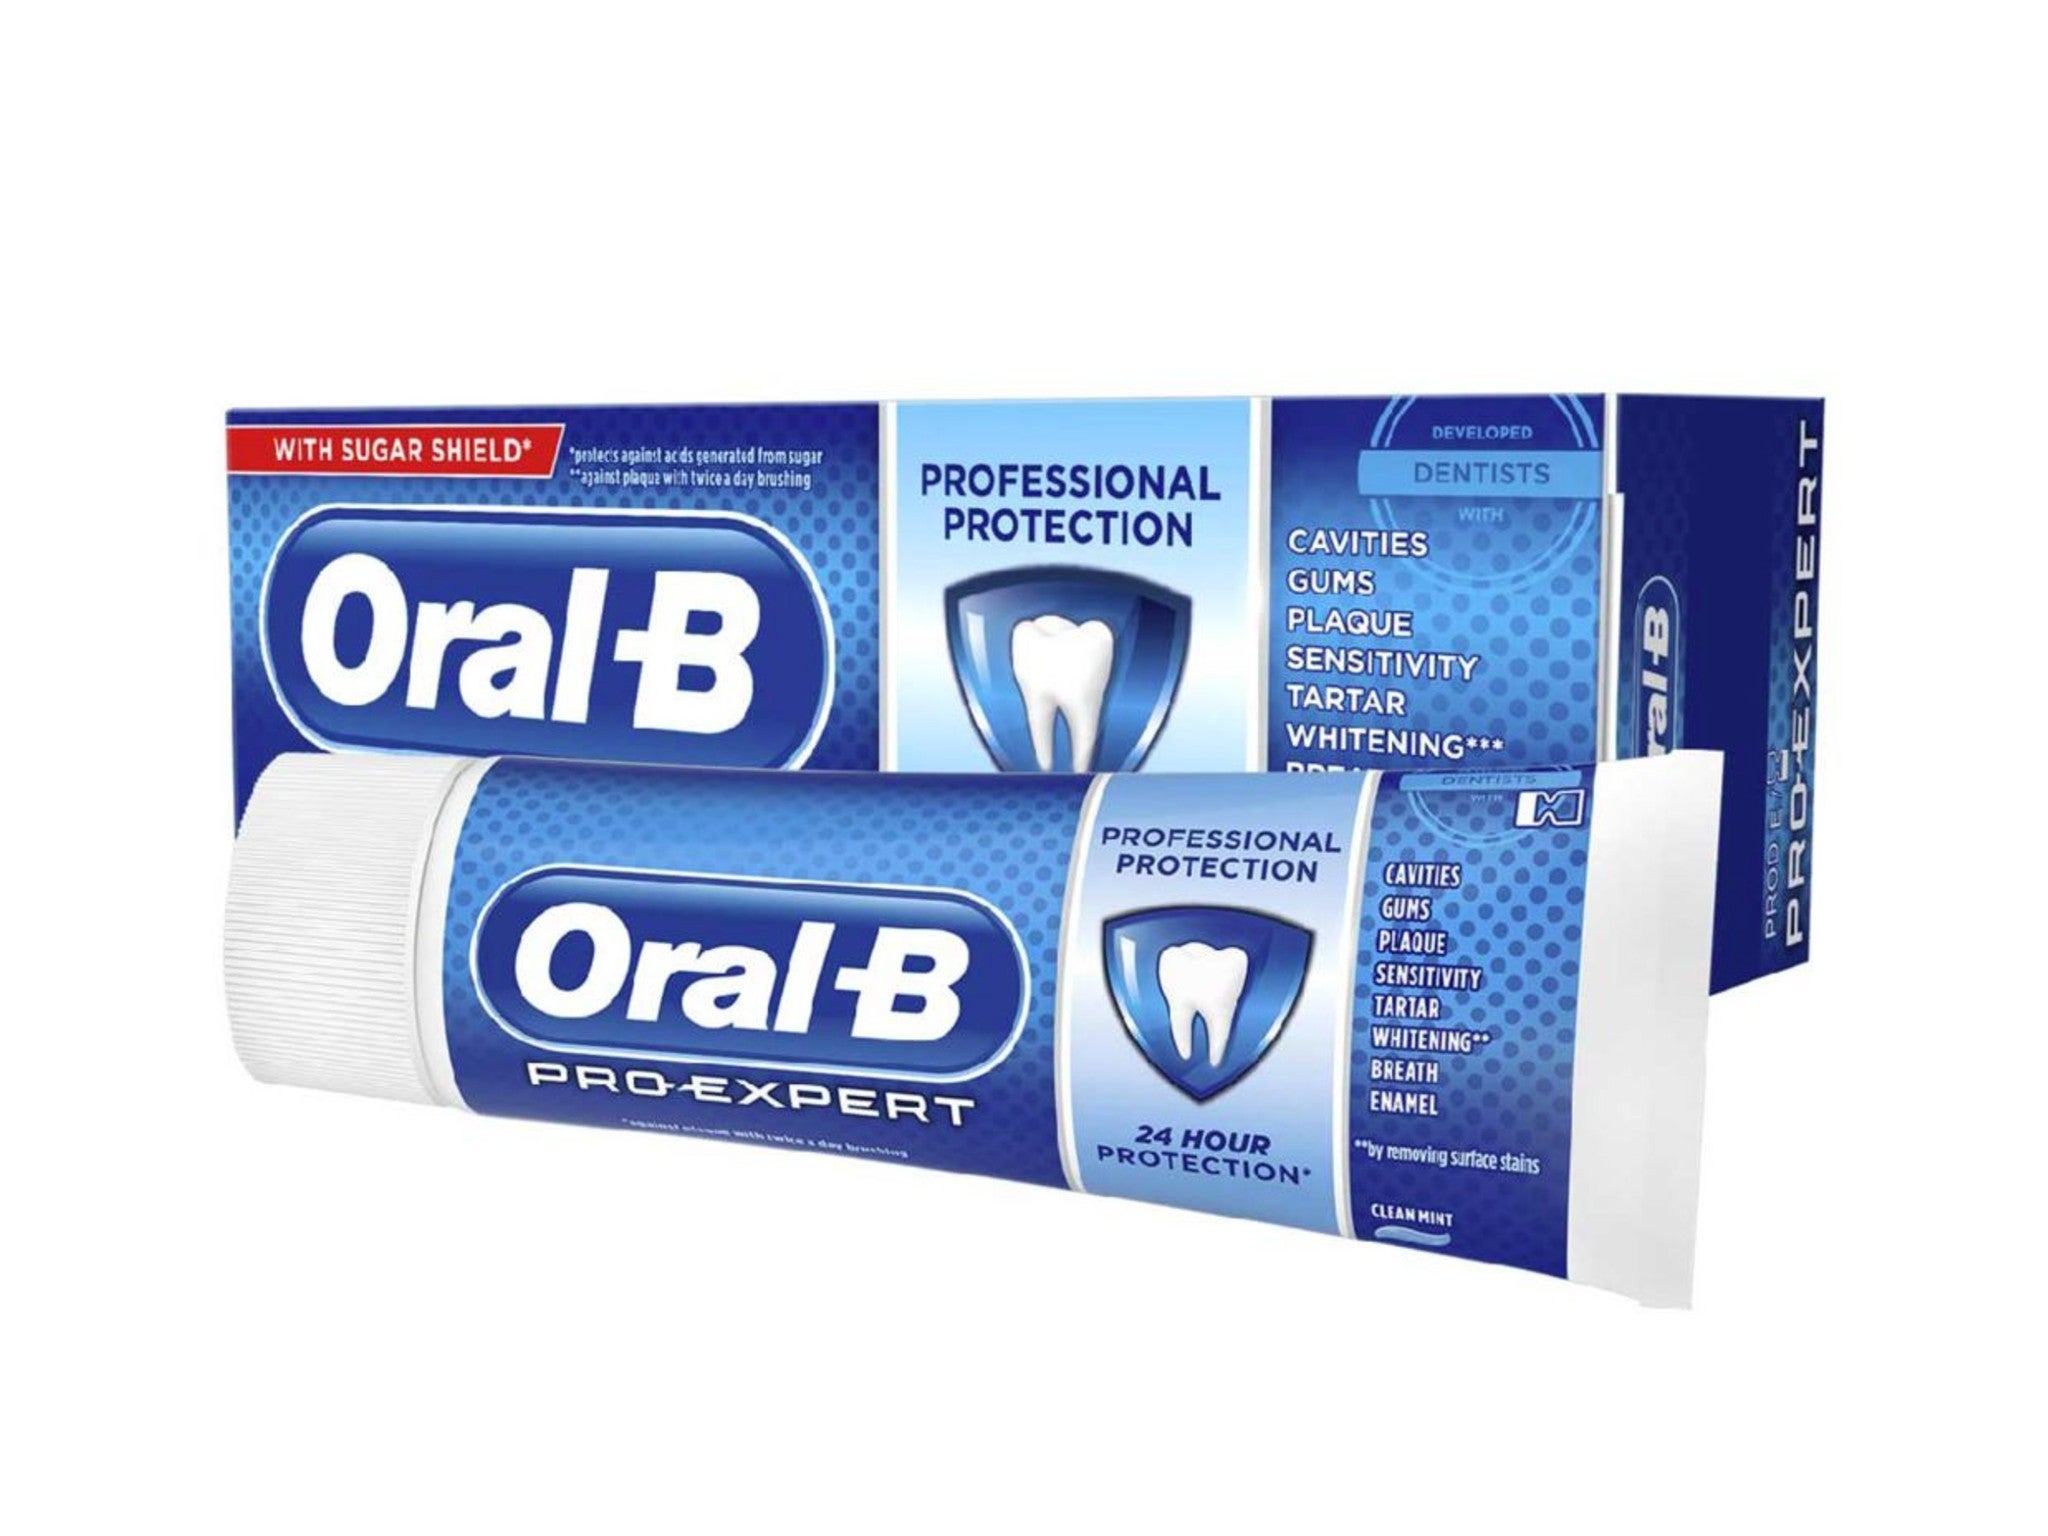 Oral-B pro expert professional protection toothpaste indybest.jpg